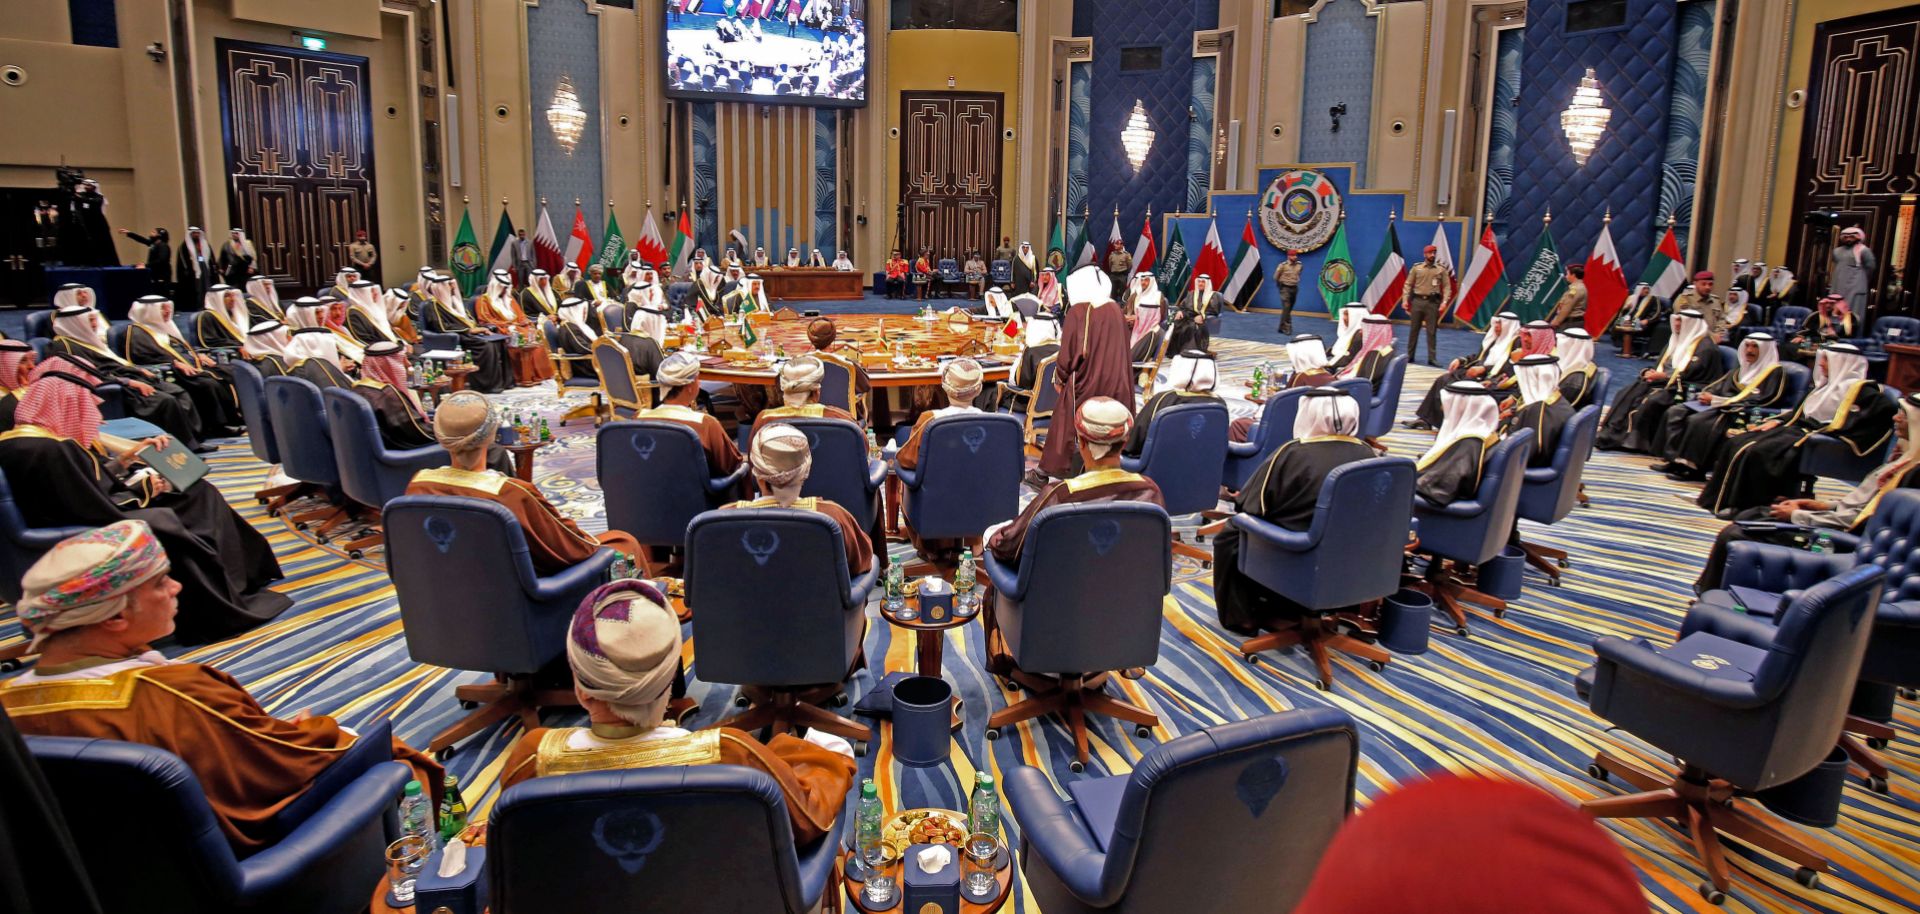 A general view for the GCC leaders meeting in Kuwait City on Dec. 5, 2017. Things have been tense in the bloc since Saudi Arabia and some GCC peers' started a campaign to isolate Qatar over differences in regional policies. Of course, the GCC has been beset by internal squabbles among its six members -- Bahrain, Kuwait, Oman, Qatar, Saudi Arabia and the United Arab Emirates -- since its inception.